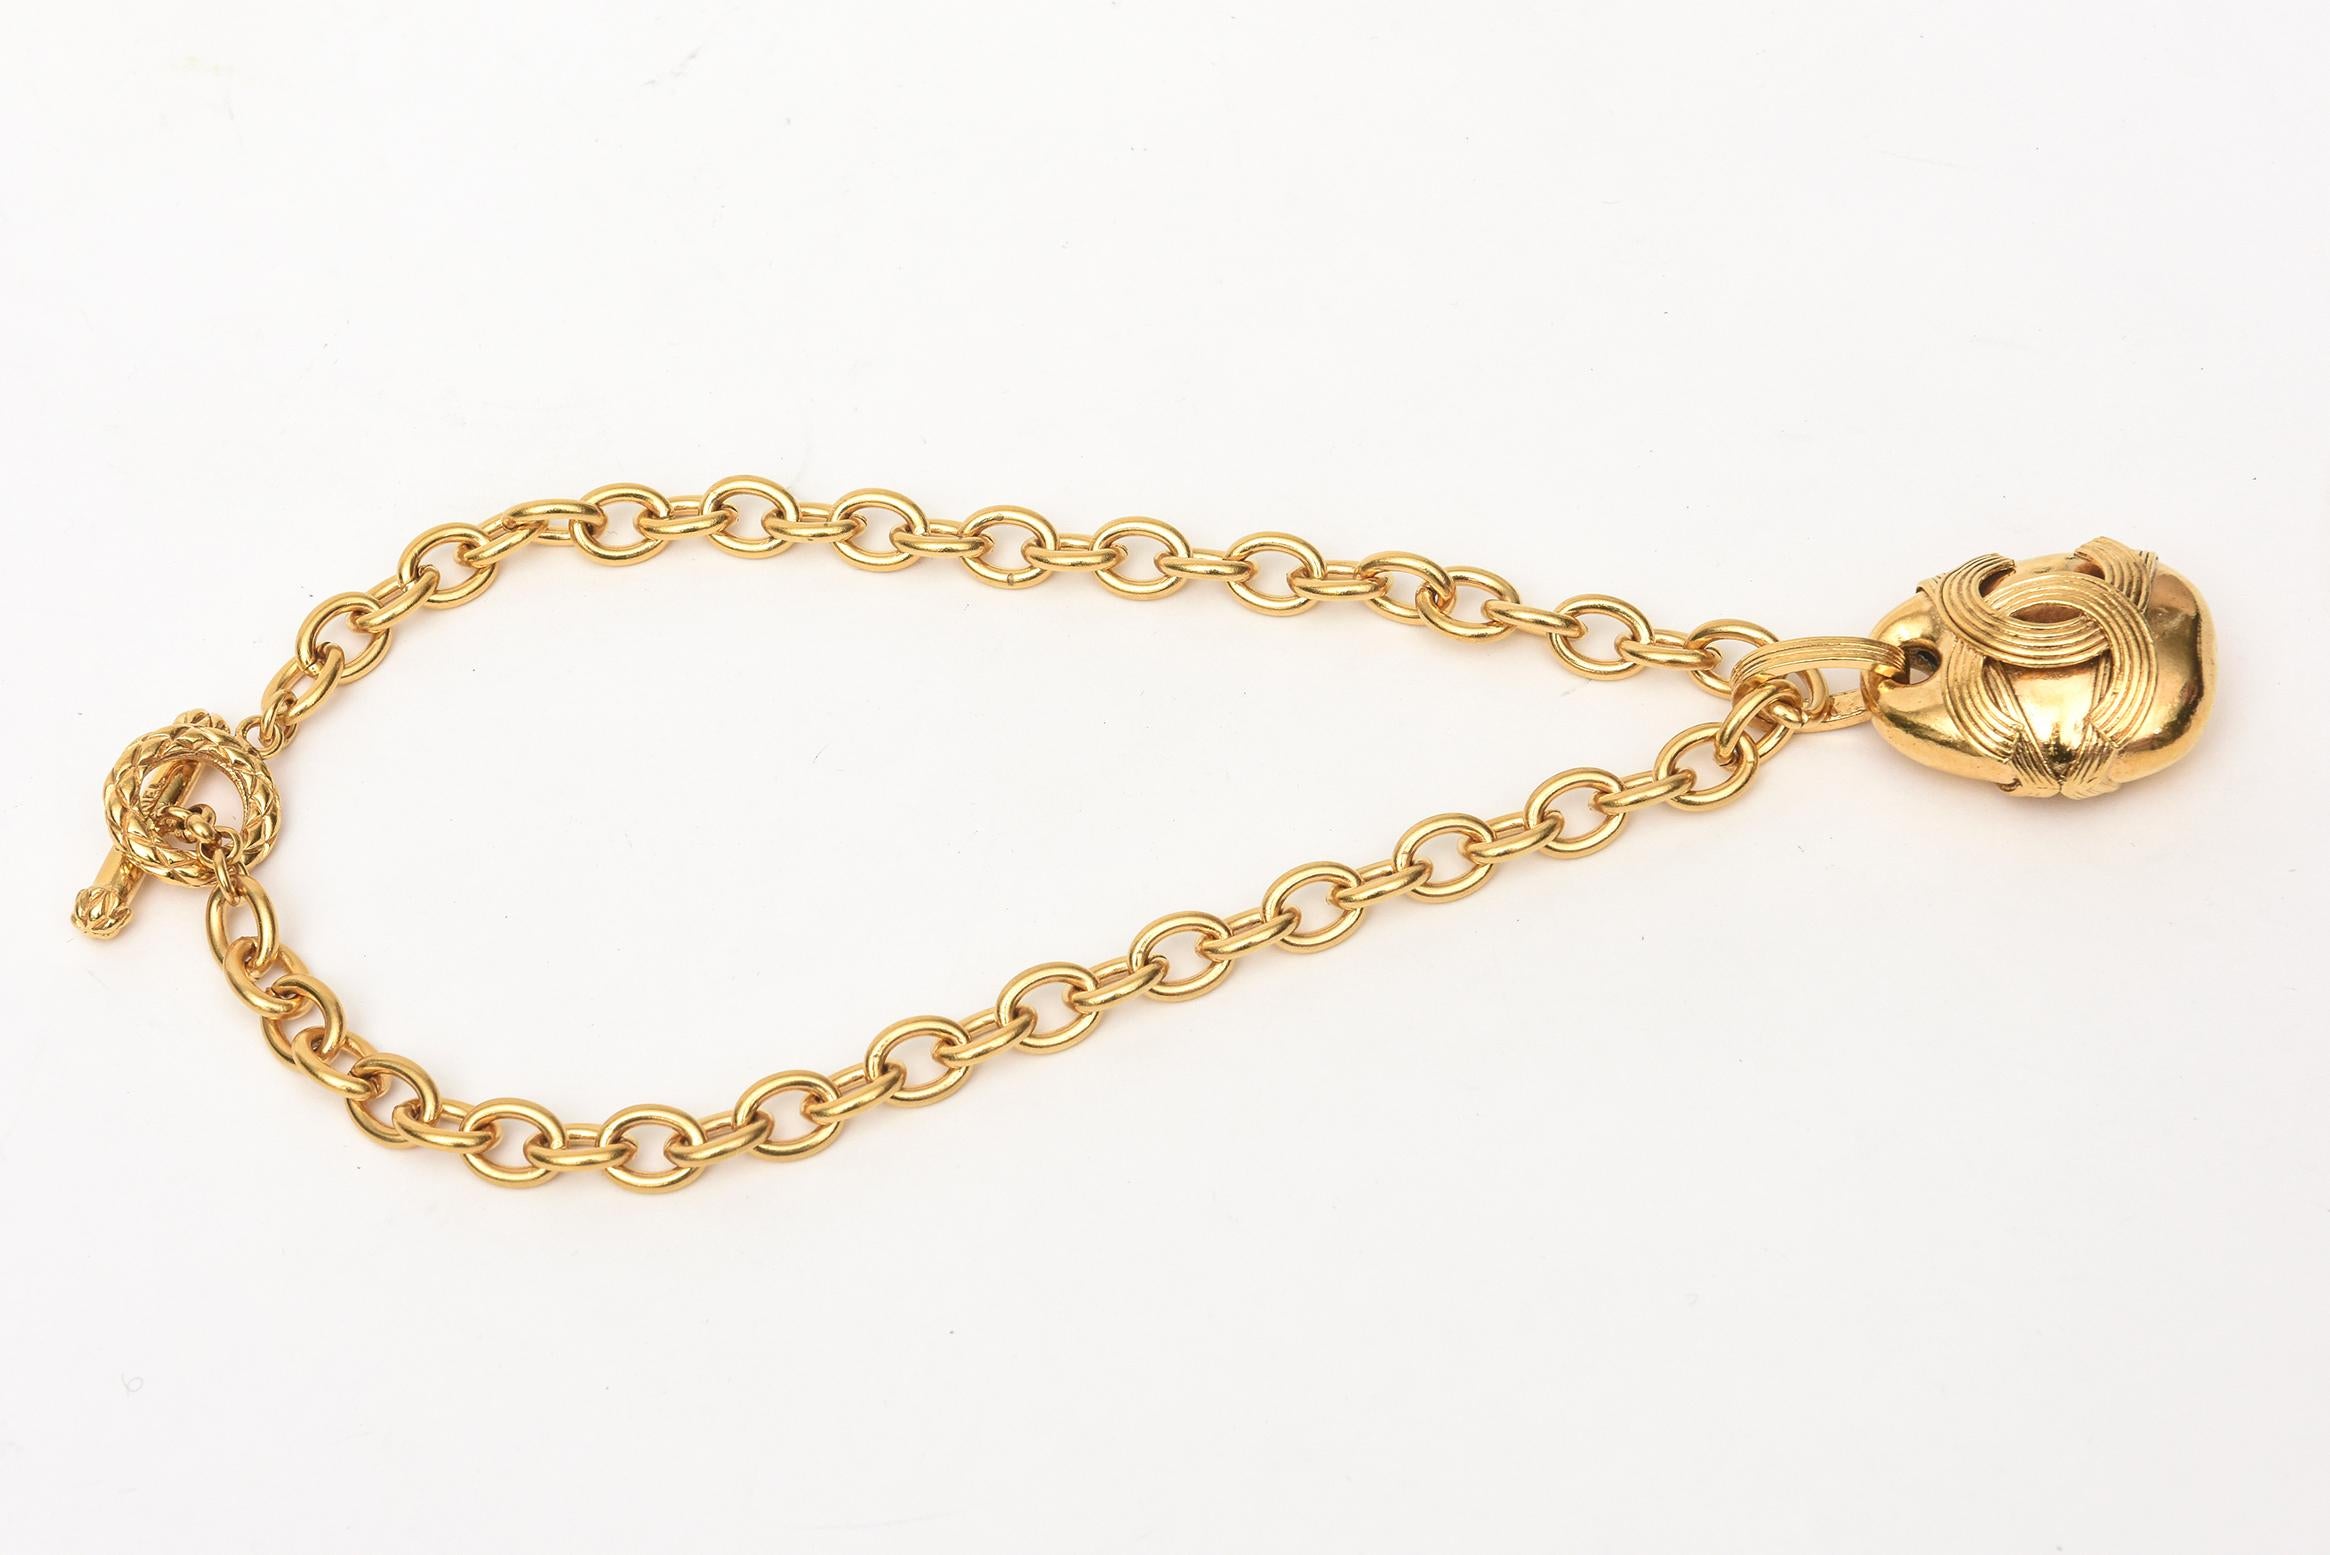 This chunky and fabulous Chanel gold plated chain necklace with large bold hanging CC pendant is marked. It is made in France Autumn of 1994. Chanel is marked on the bar part of the clasp. It is arresting on your neck and looks amazing on. It has